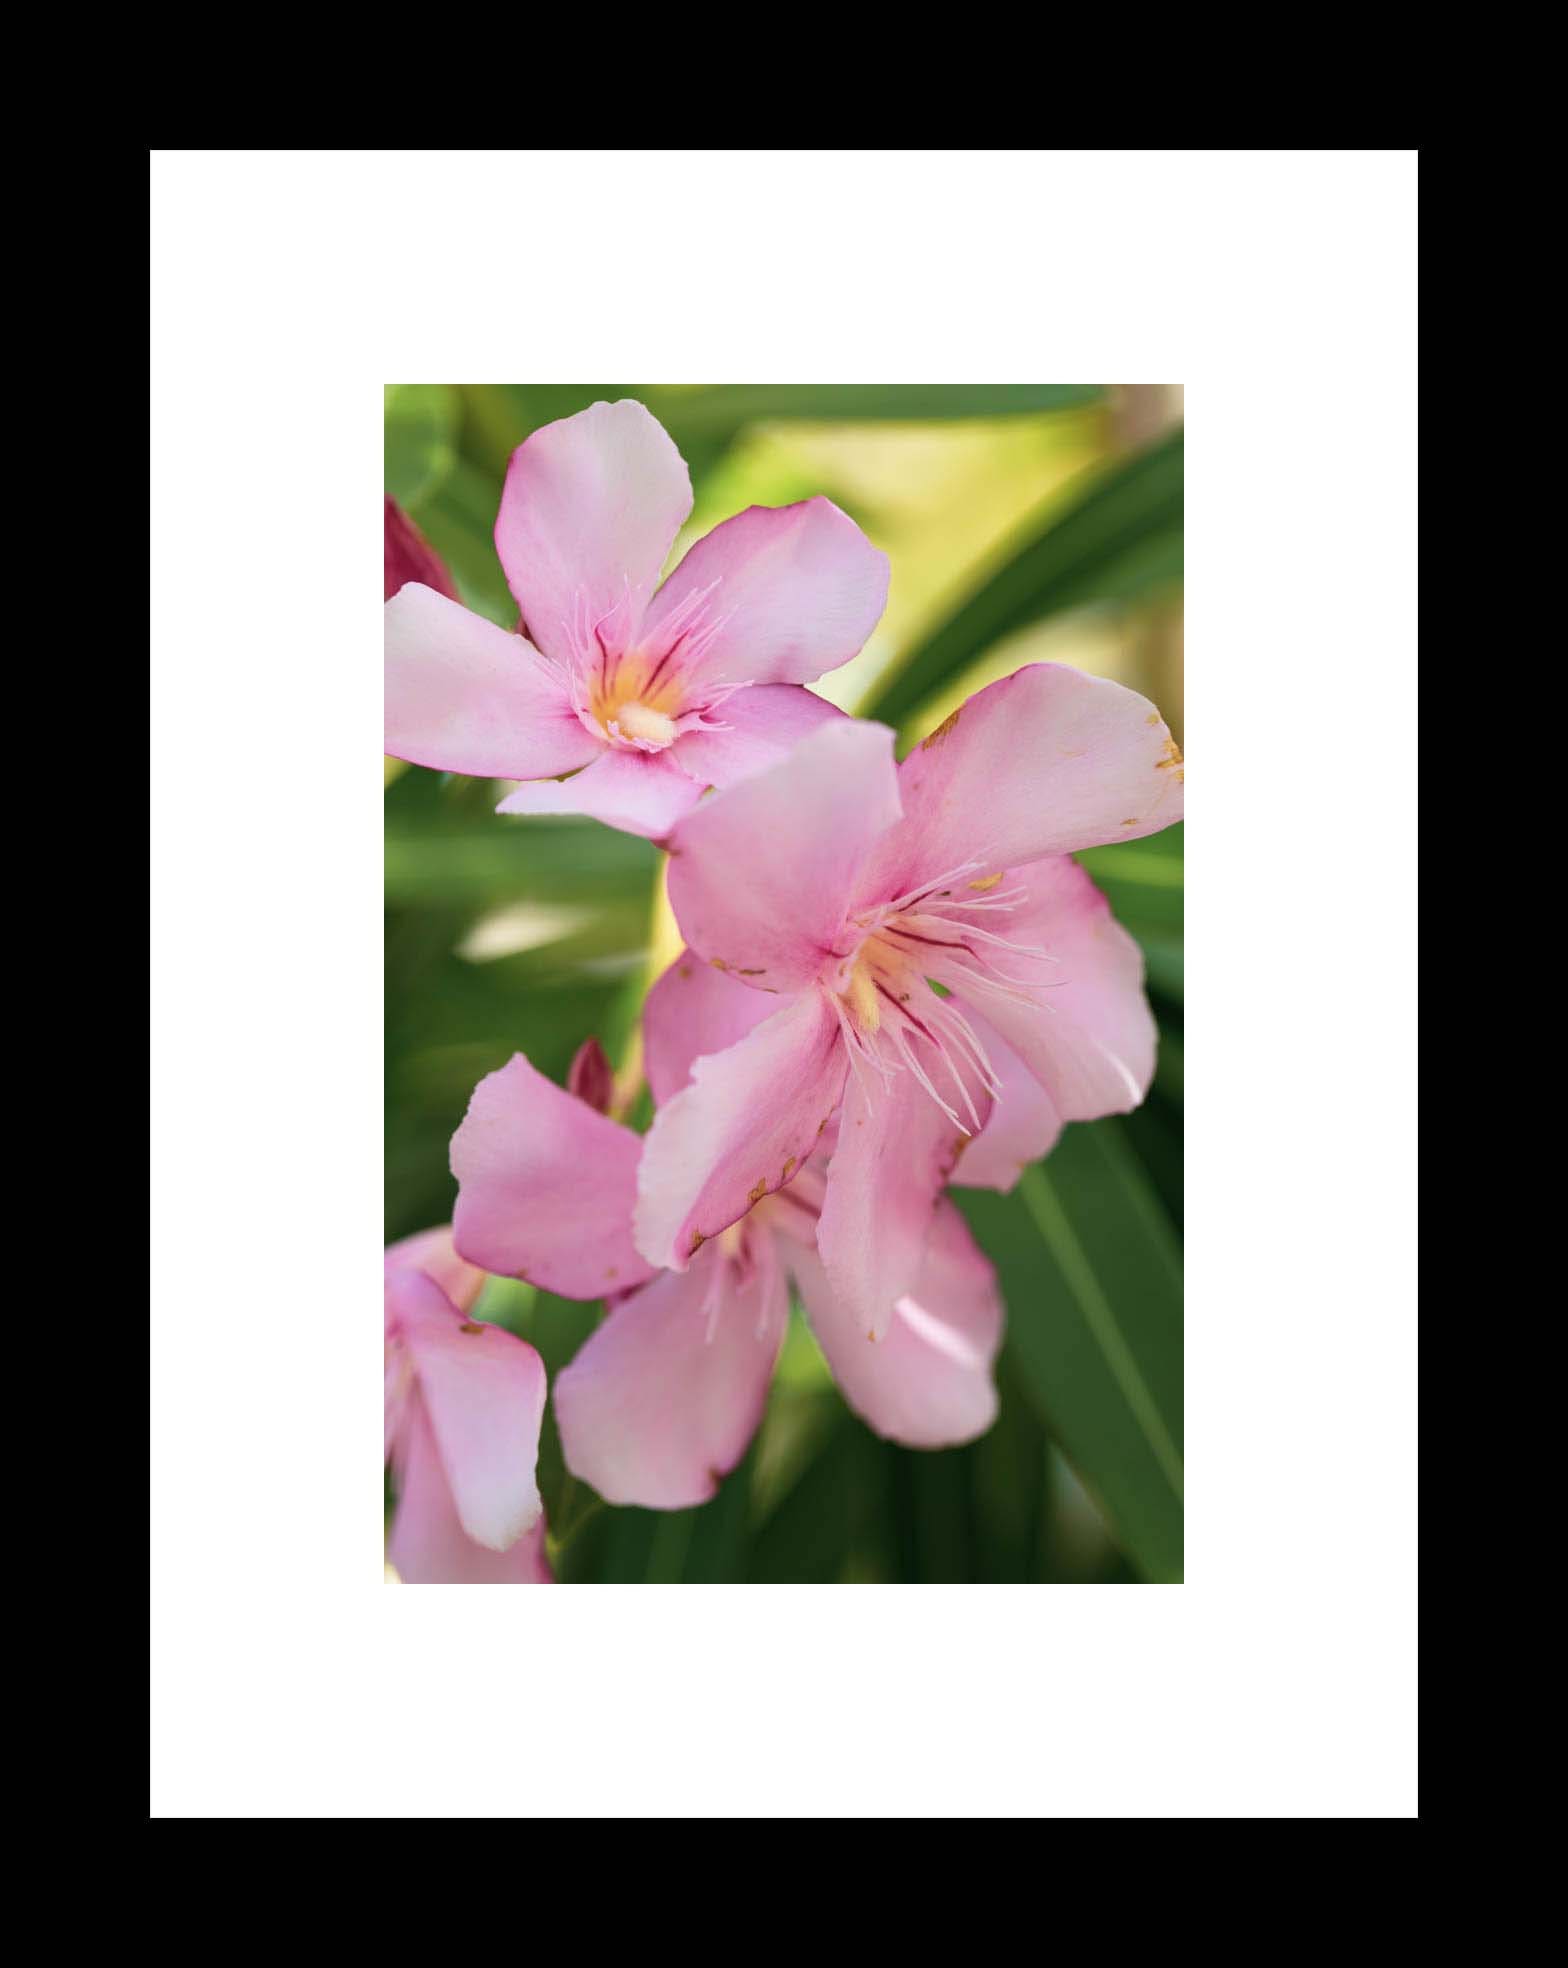 Pink Oleander Flower Photography Print, Botanical Gallery Canvas or Unframed Photo, Nature Wall Art - eireanneilis